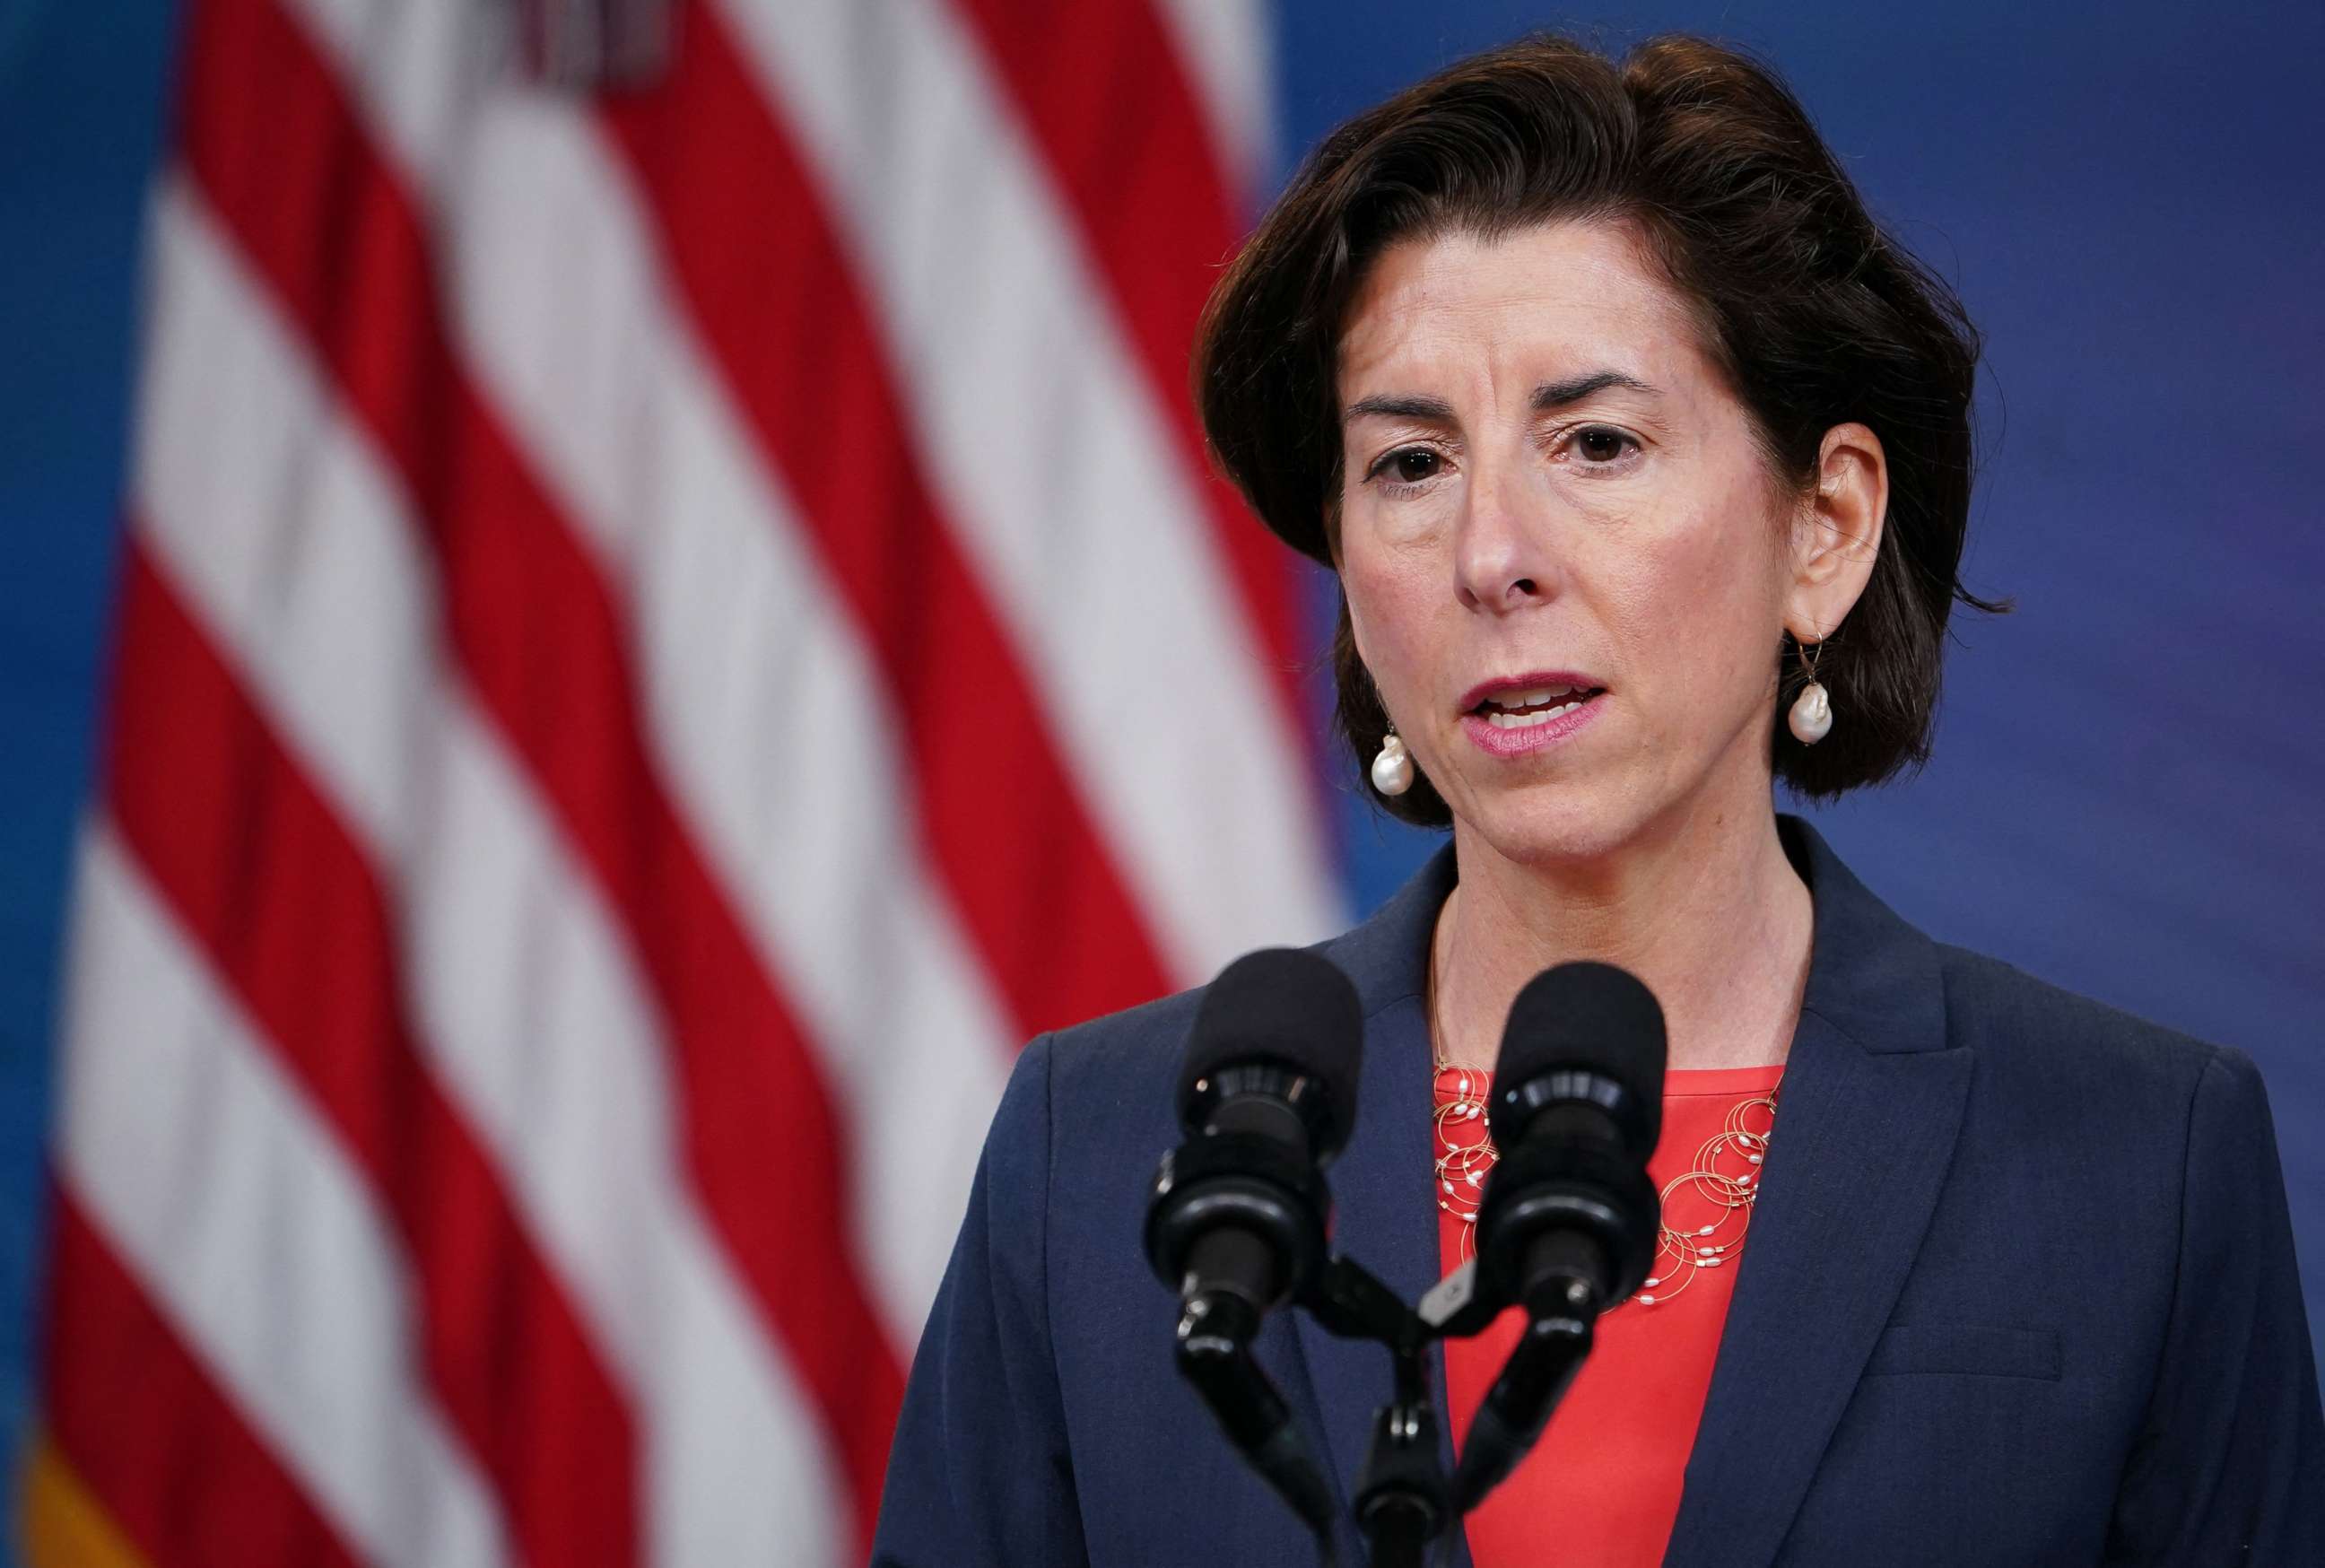 PHOTO: Commerce Secretary Gina Raimondo speaks at an event in the South Court Auditorium of the Eisenhower Executive Office Building on June 3, 2021.